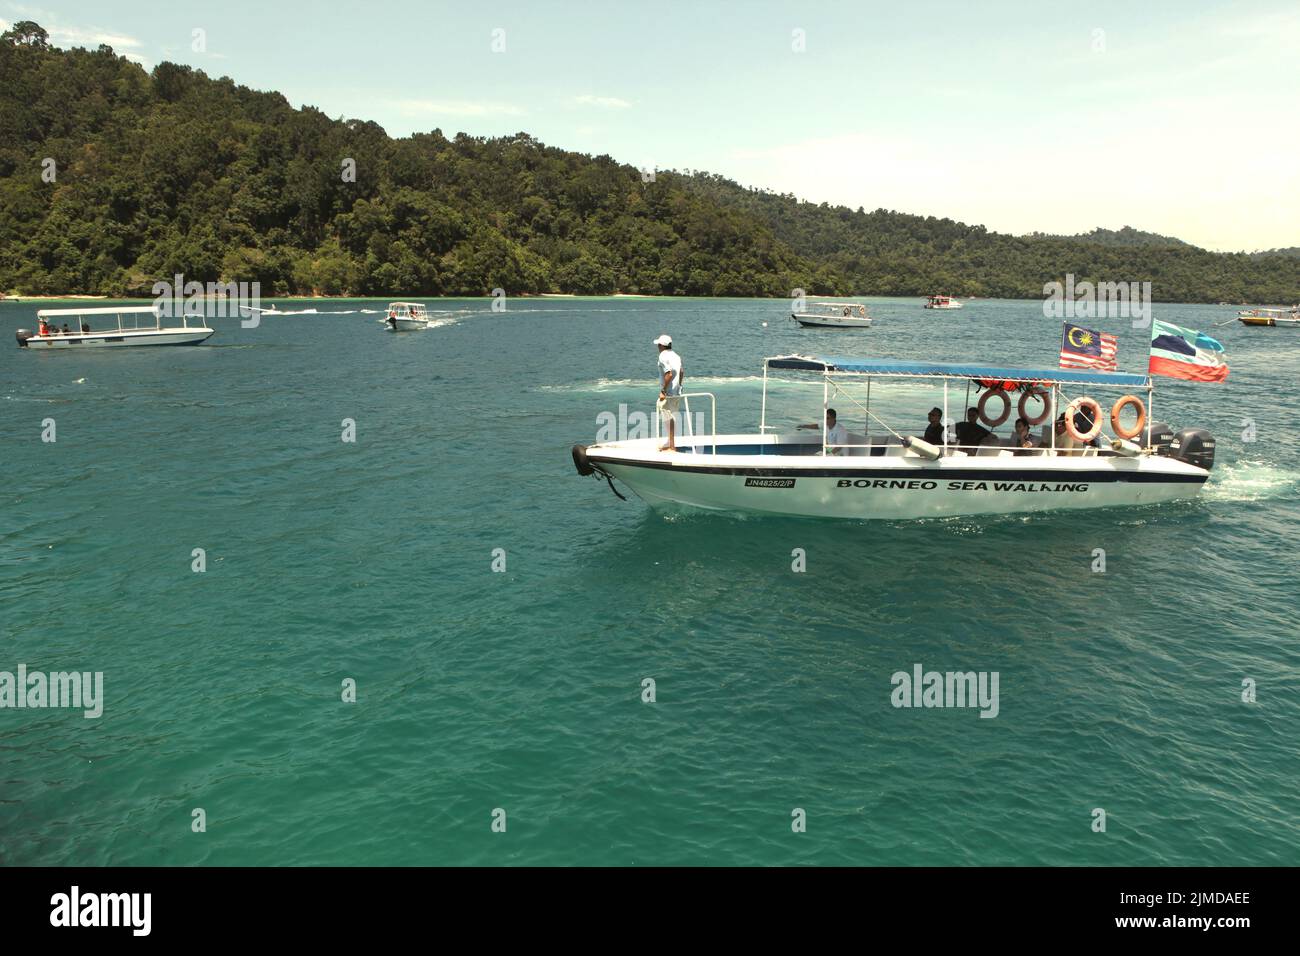 A boat carrying tourists sailing on the water within the area of Tunku Abdul Rahman Park in Sabah, Malaysia. Stock Photo